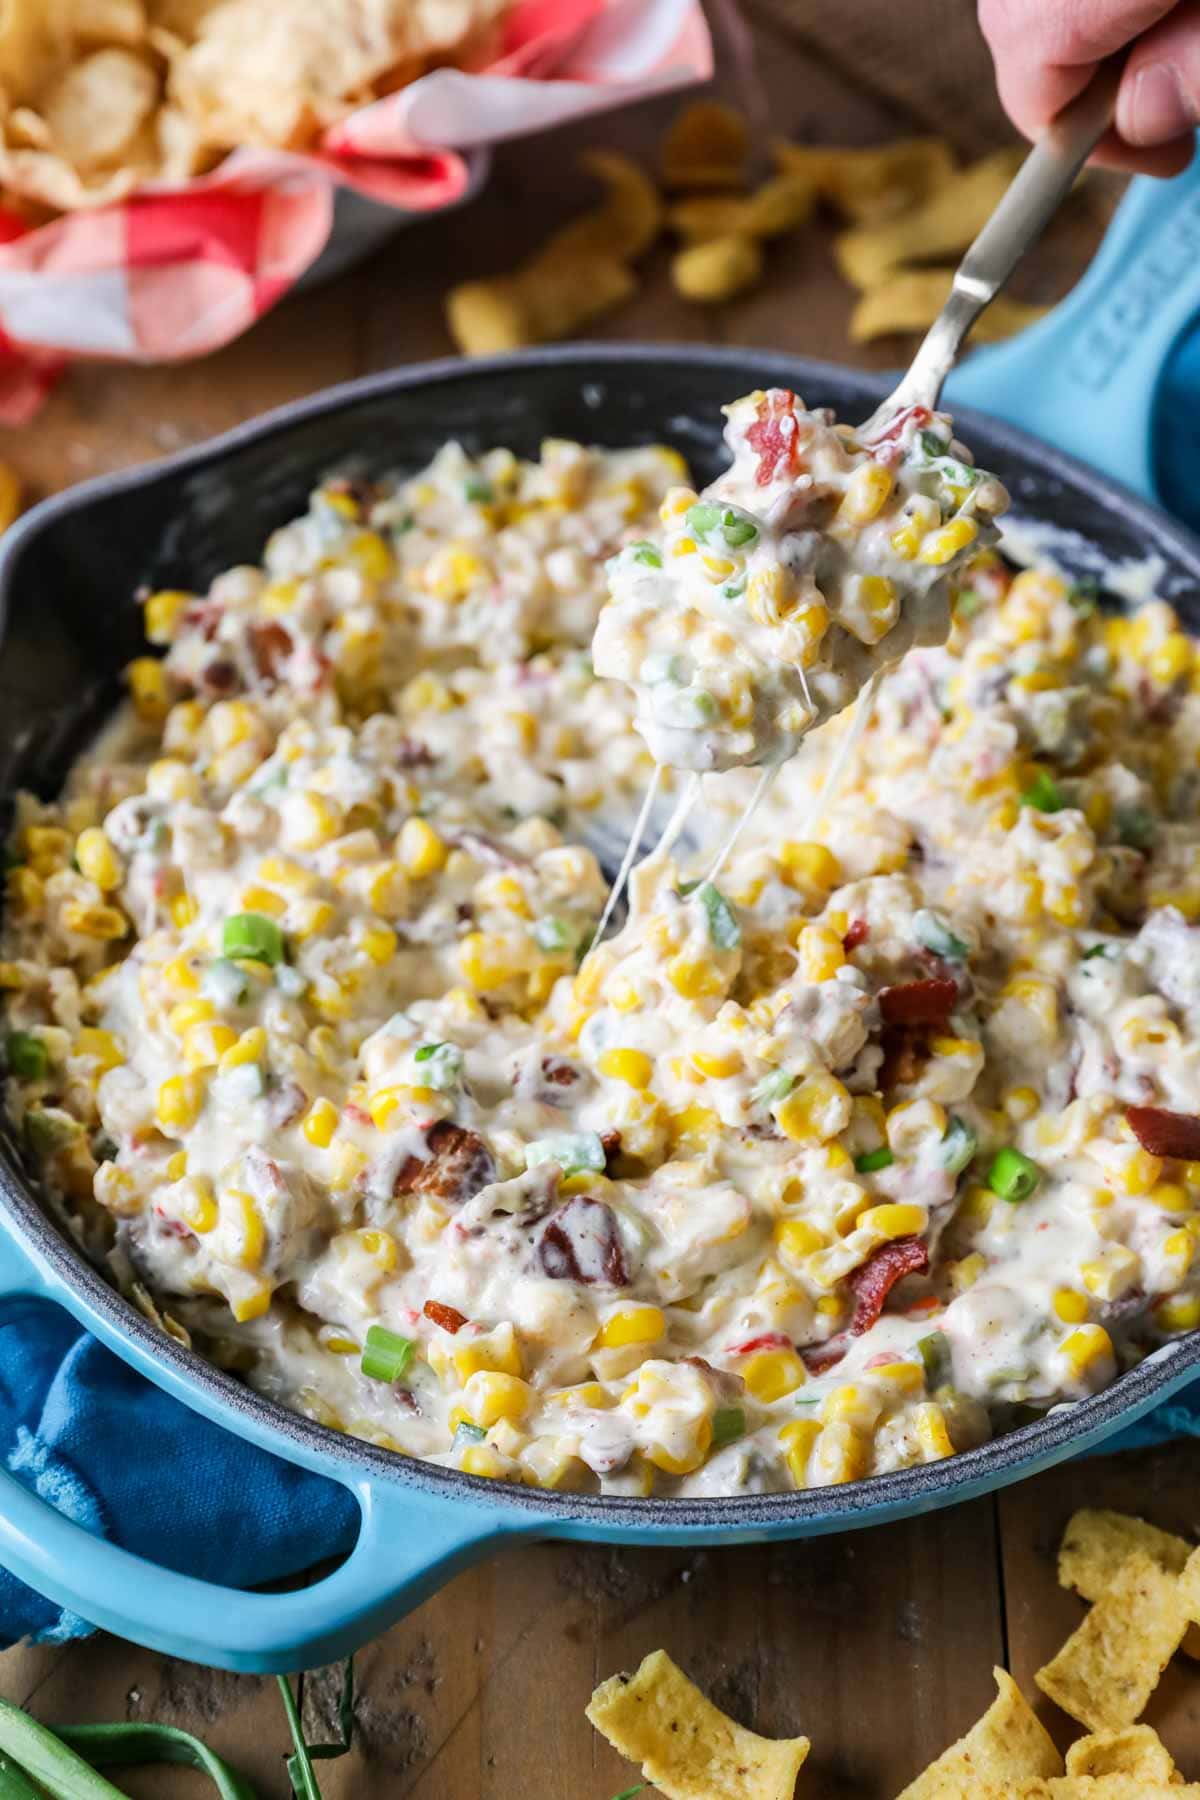 Cheesy corn dip in a skillet after baking.